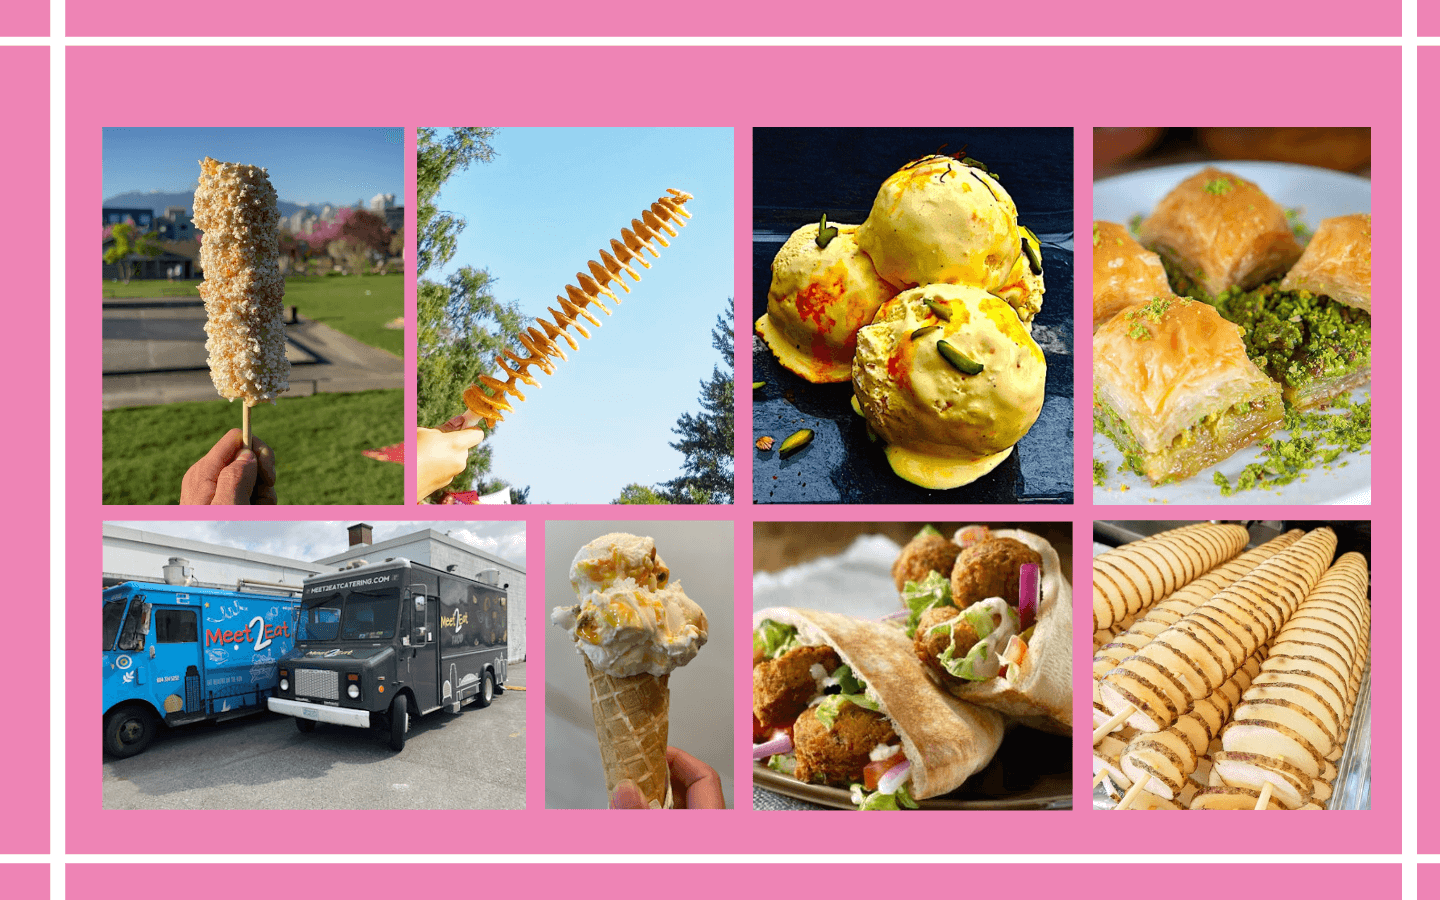 A promotional image for the food trucks at the 2023 children's festival. In the top row, from left to right, there is an image of an Elotes corn cob, a Potato Hurricane, Saffron Ice Cream, and Baklava. On the bottom row, from left to right, there's an image of two food trucks from Meet2Eat catering, an ice cream cone, a falafel, and more spiralized potato's on sticks.